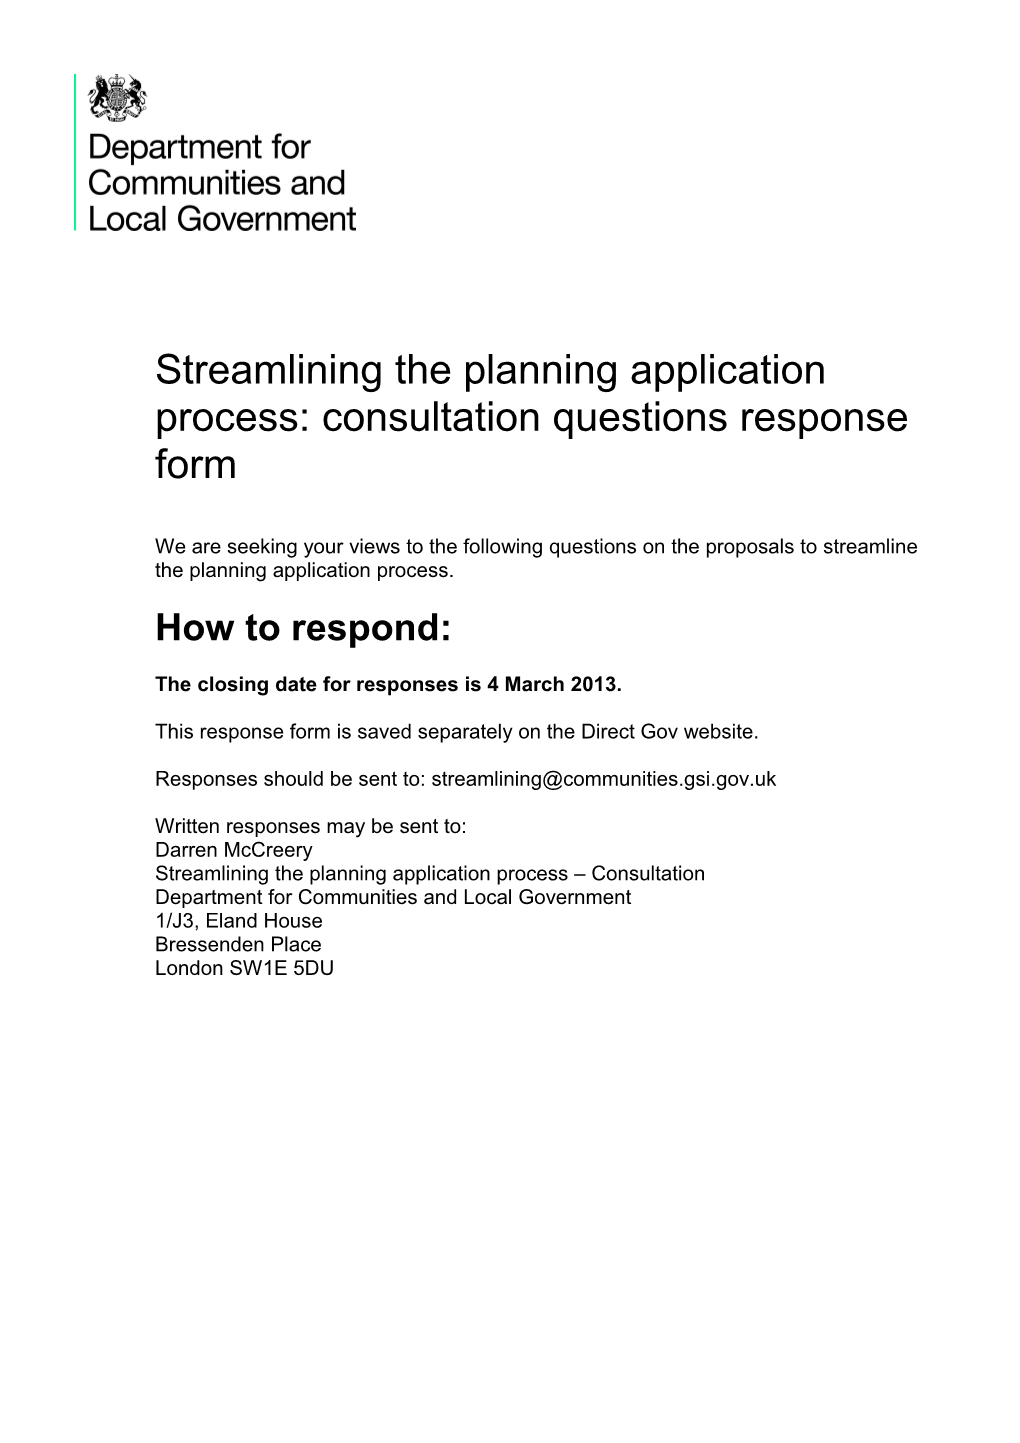 Streamlining the Planning Application Process: Consultation Questions Response Form